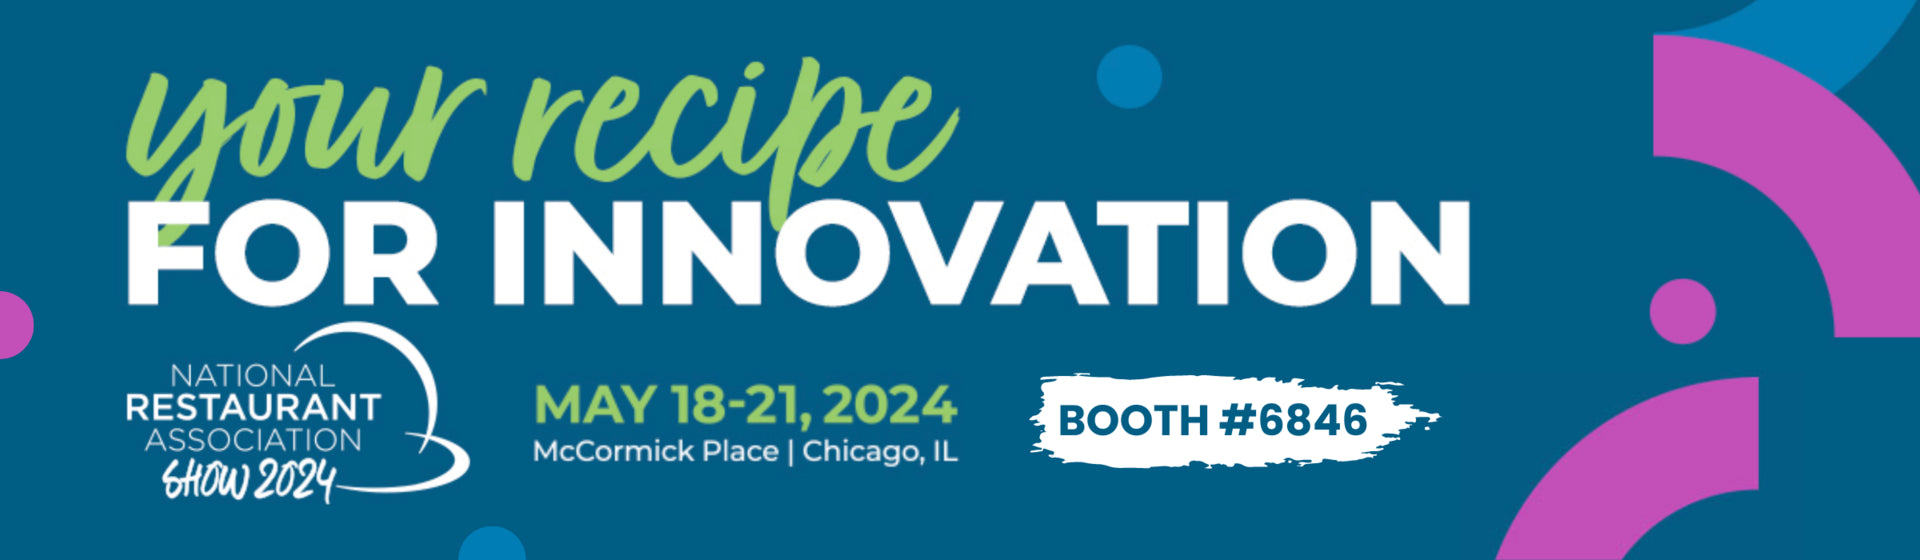 Your recipe for innovation. National Restaurant Association Show 2024. May 18-21, 2024. McCormick Place | Chicago, IL. Booth #6846